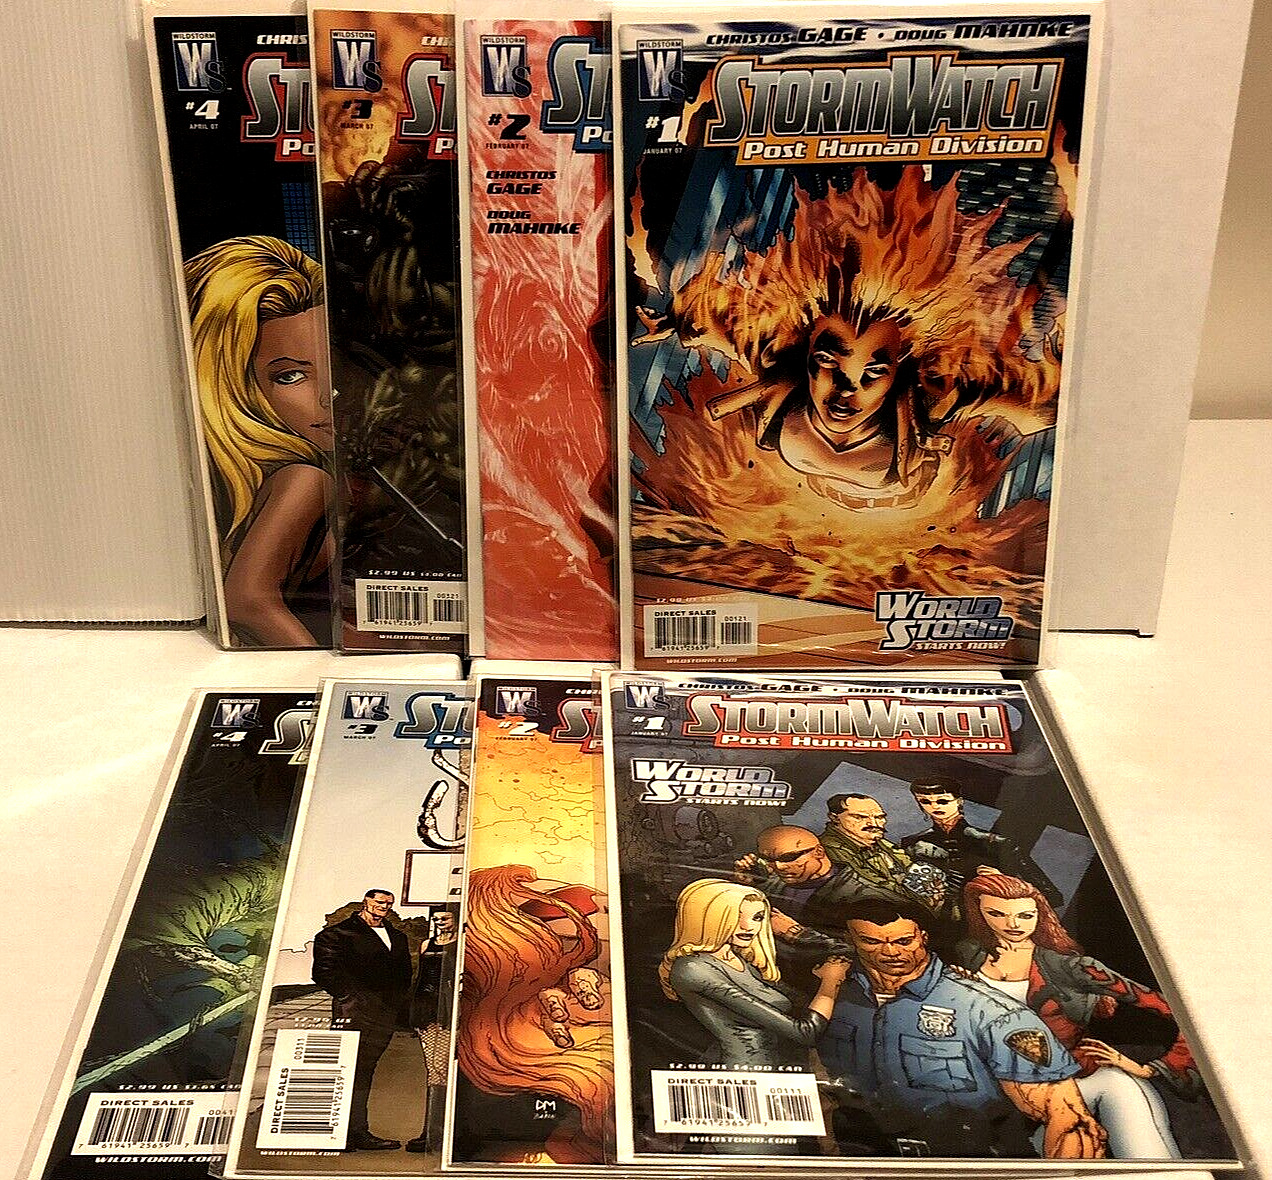 STORMWATCH PHD #1-4 Covers A & B Variants - Lot of 8 AUTHORITY WILDSTORM 2007 NM